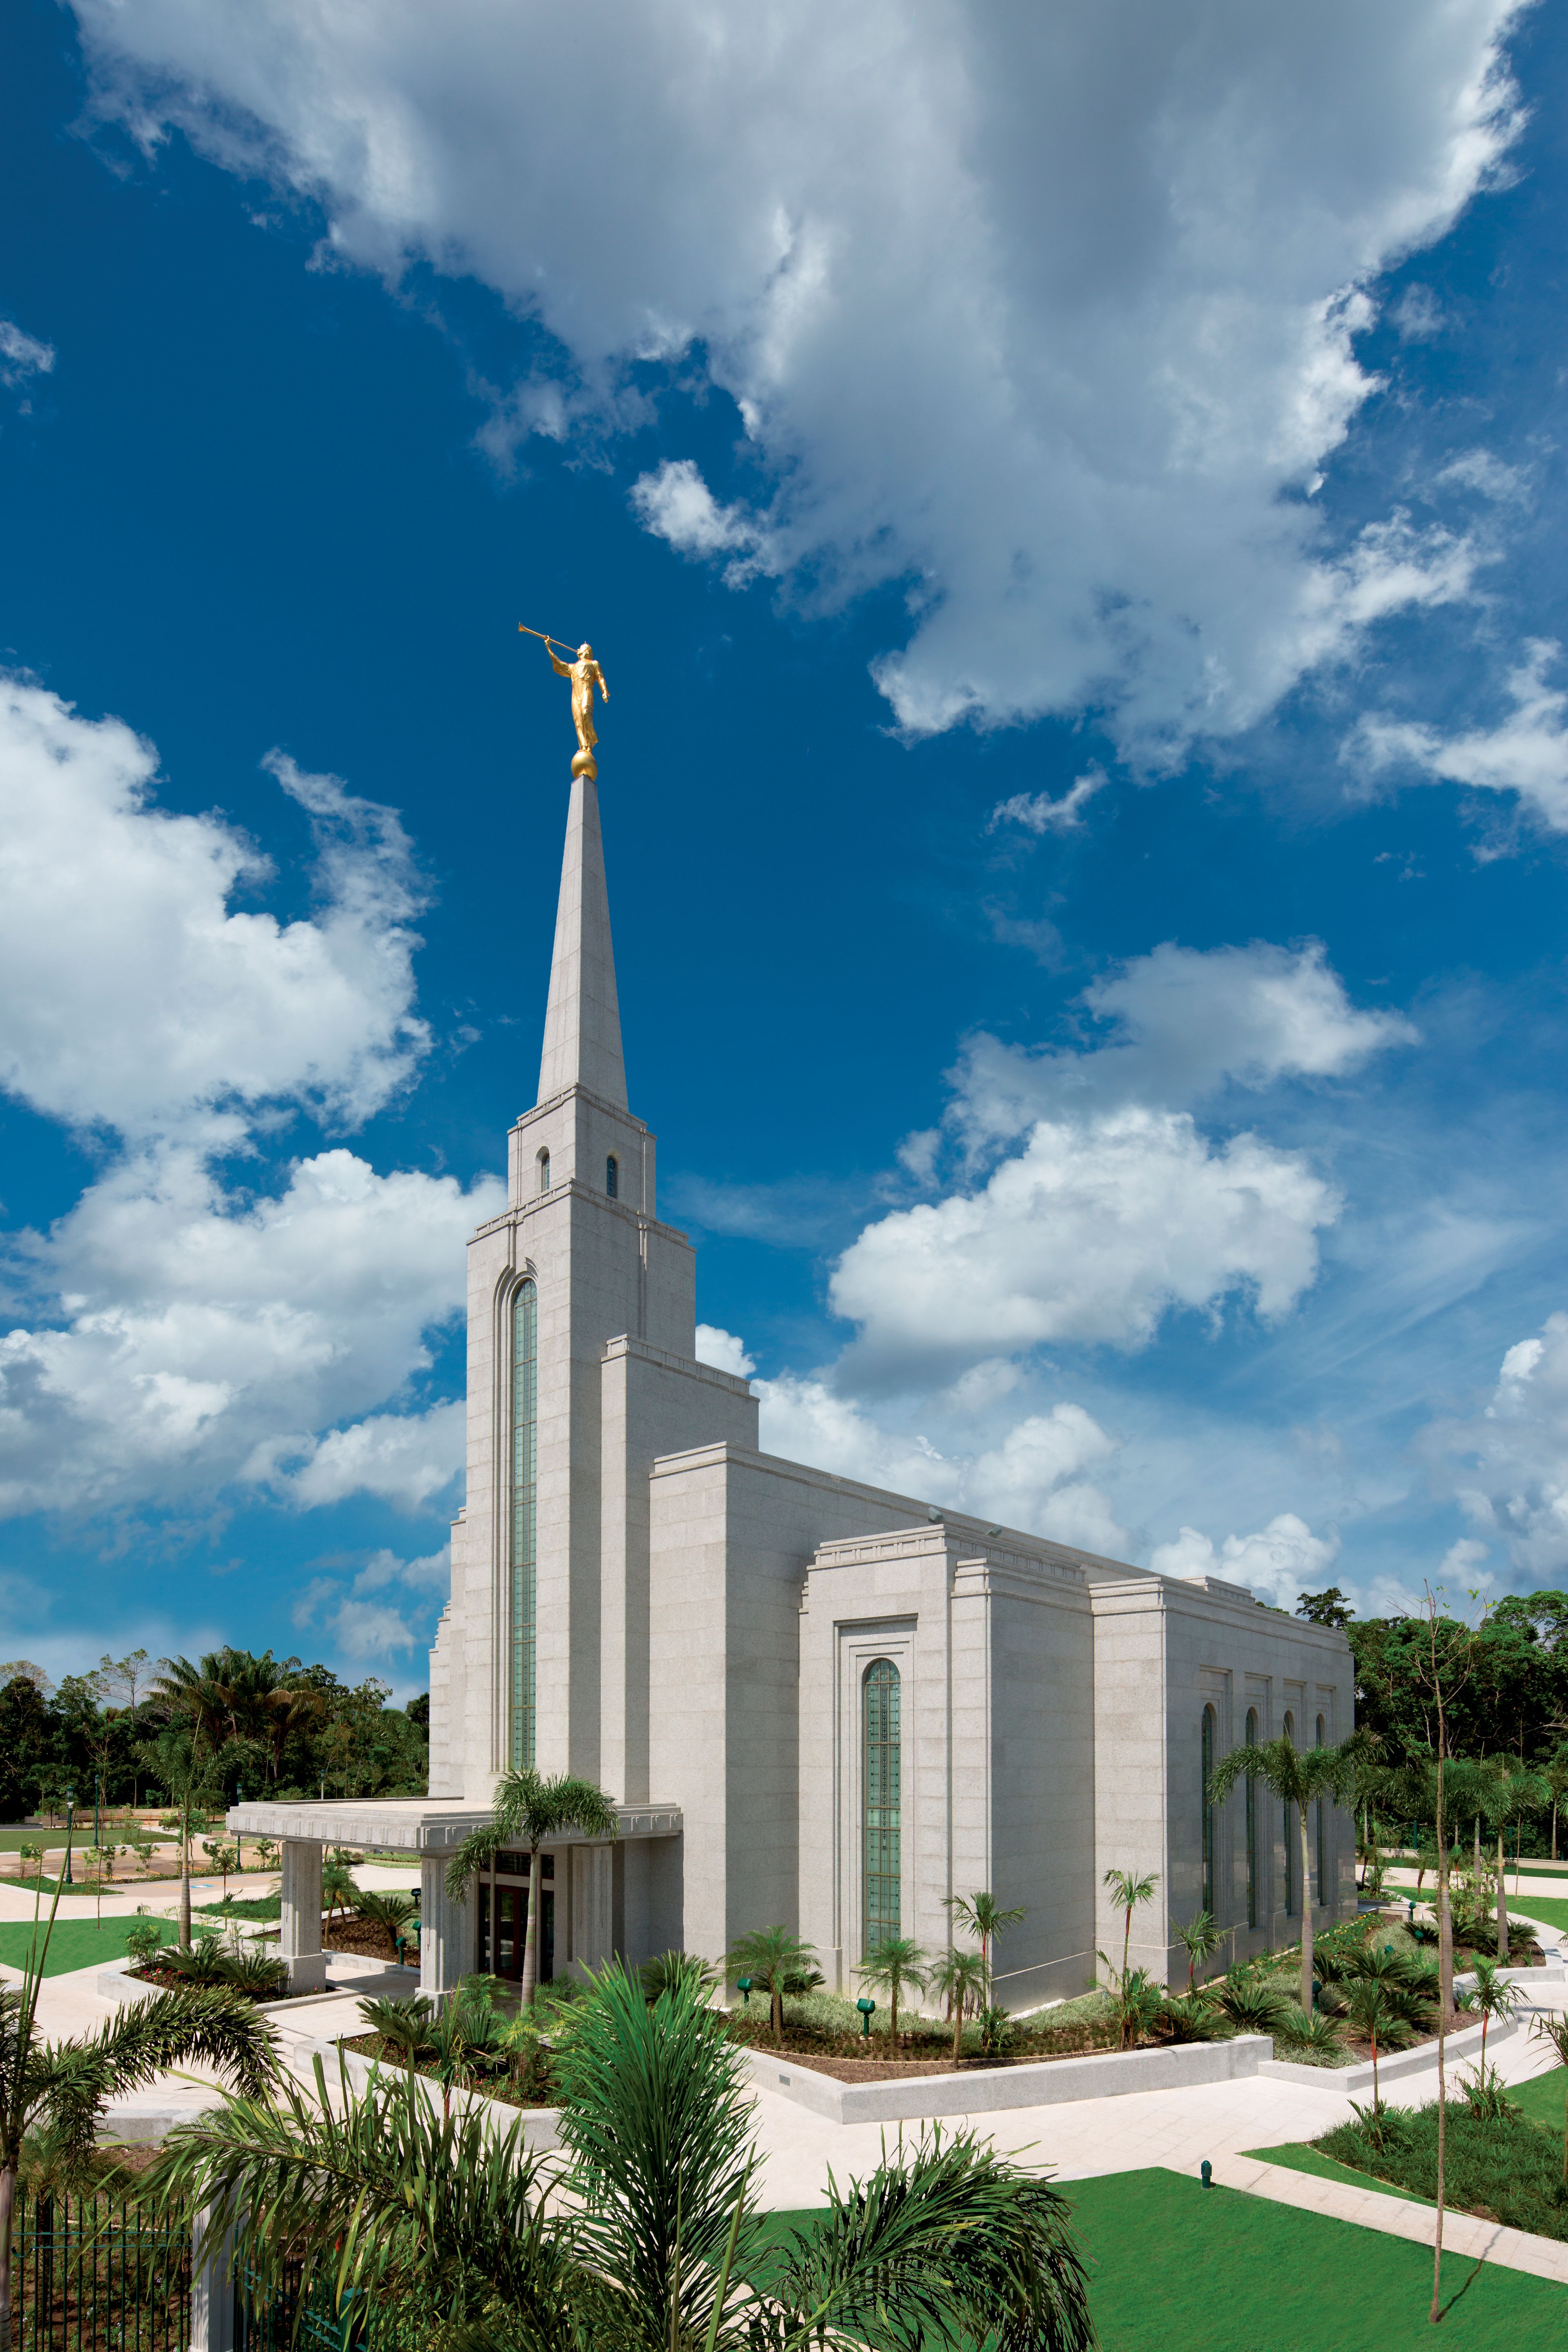 The Manaus Brazil Temple, including the entrance and scenery.